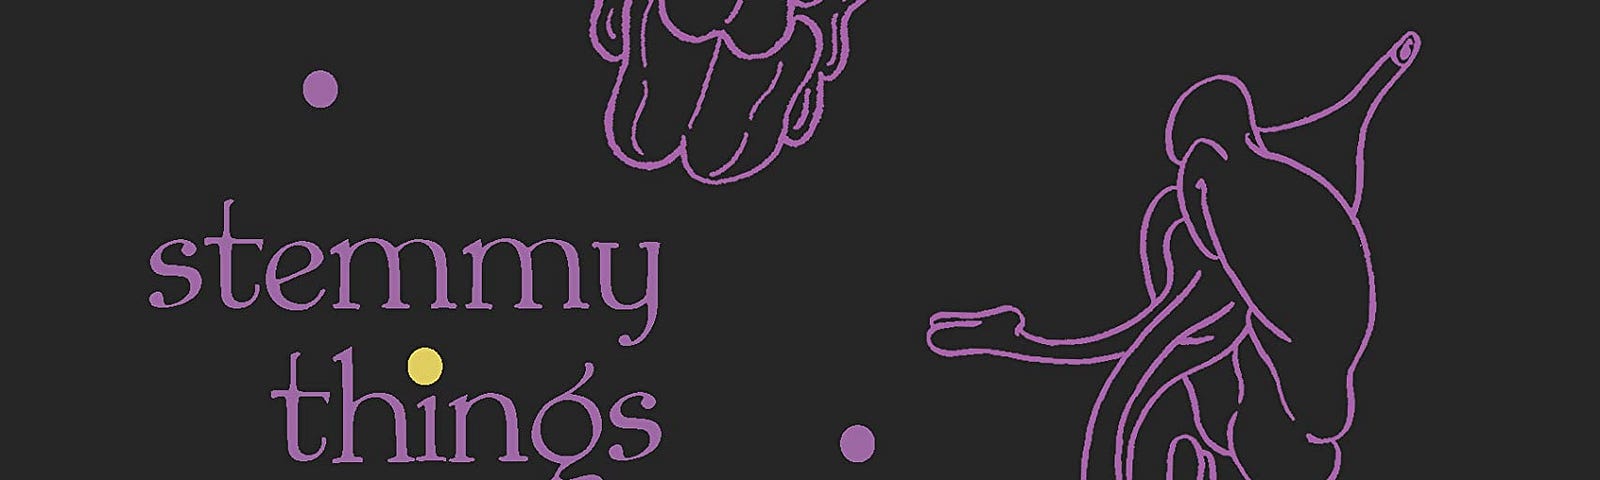 The cover of imogen xtian smith’s stemmy things is black with purple text and line art featuring various kinds of blooms (that at first glance appear phallic and vulval) along with a hand with long nails pointing upward.